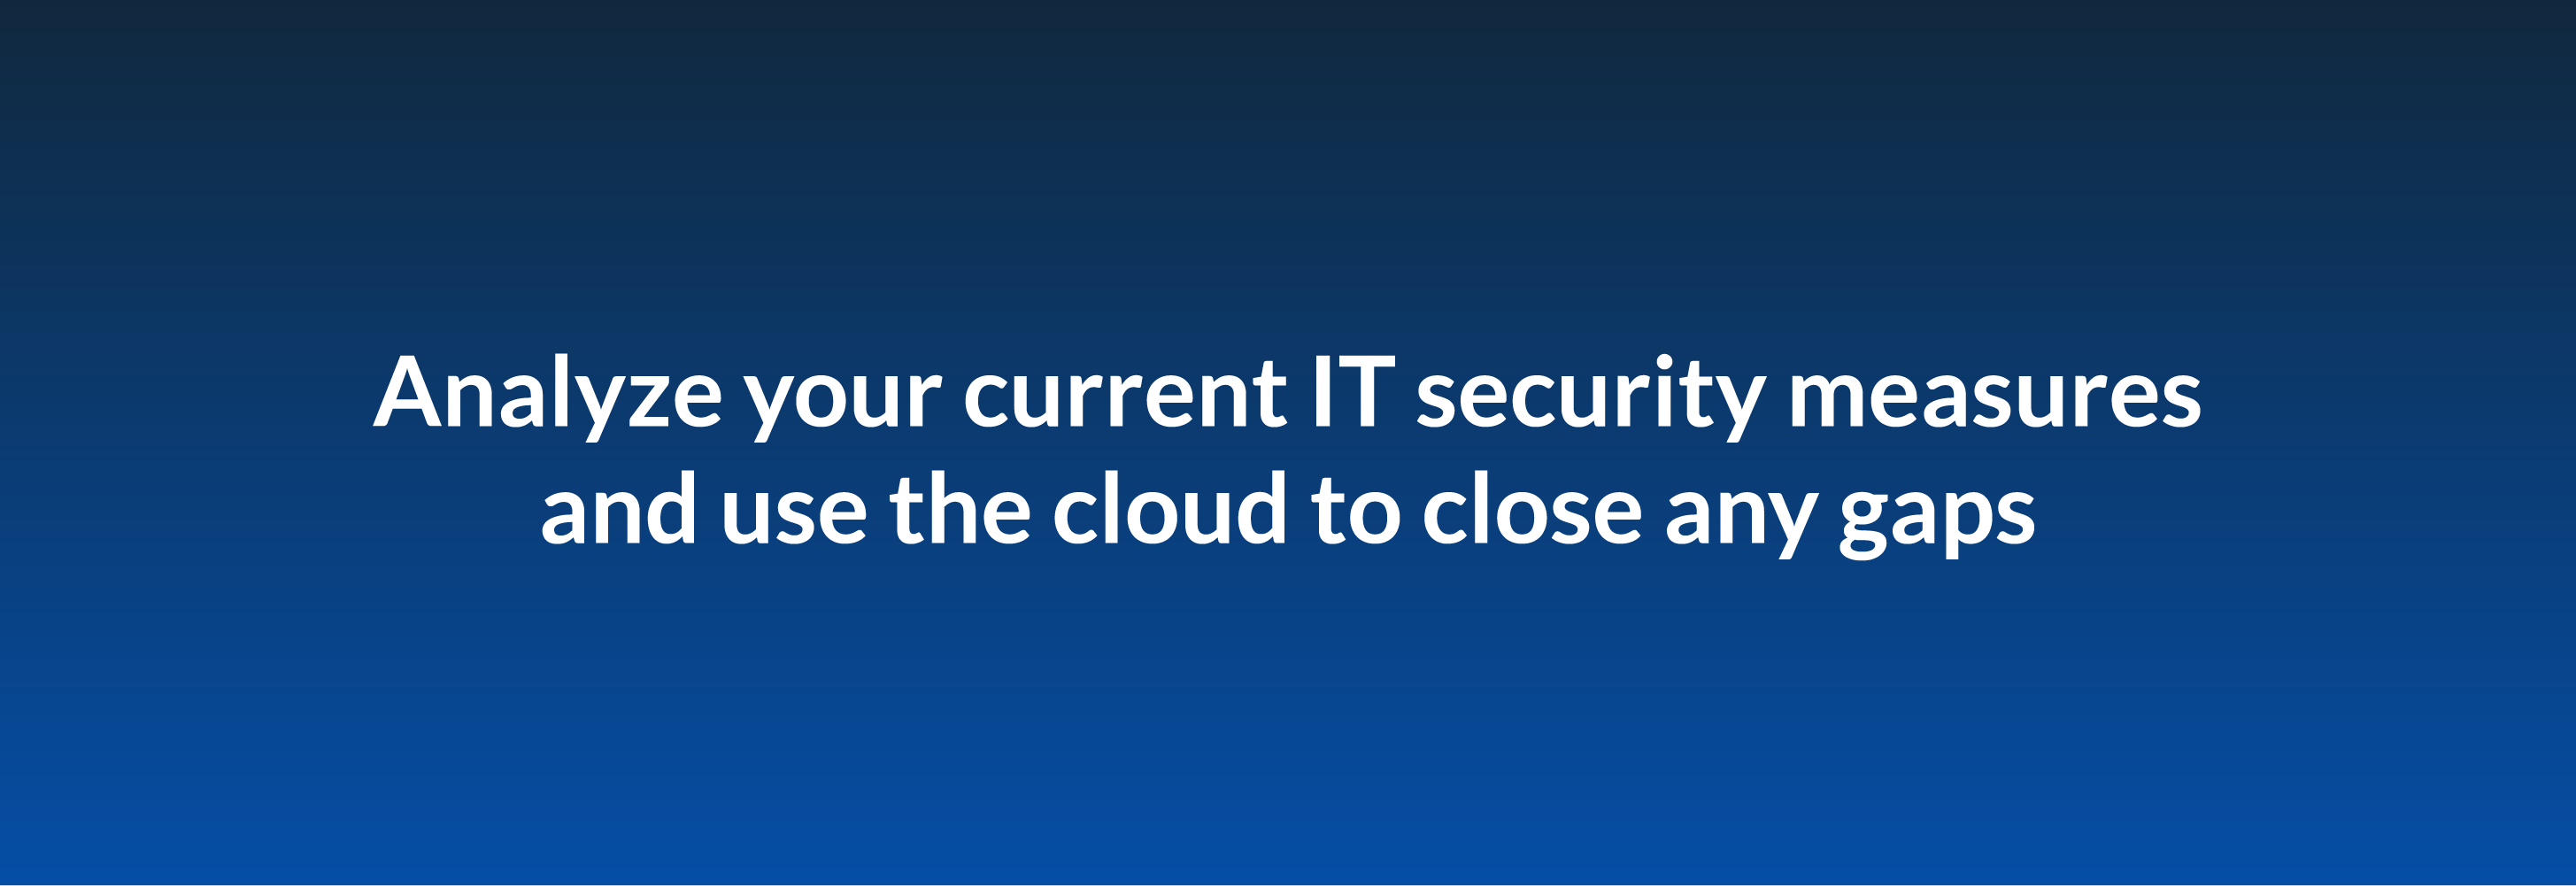 Analyze your current IT security measures and use the cloud to close any gaps